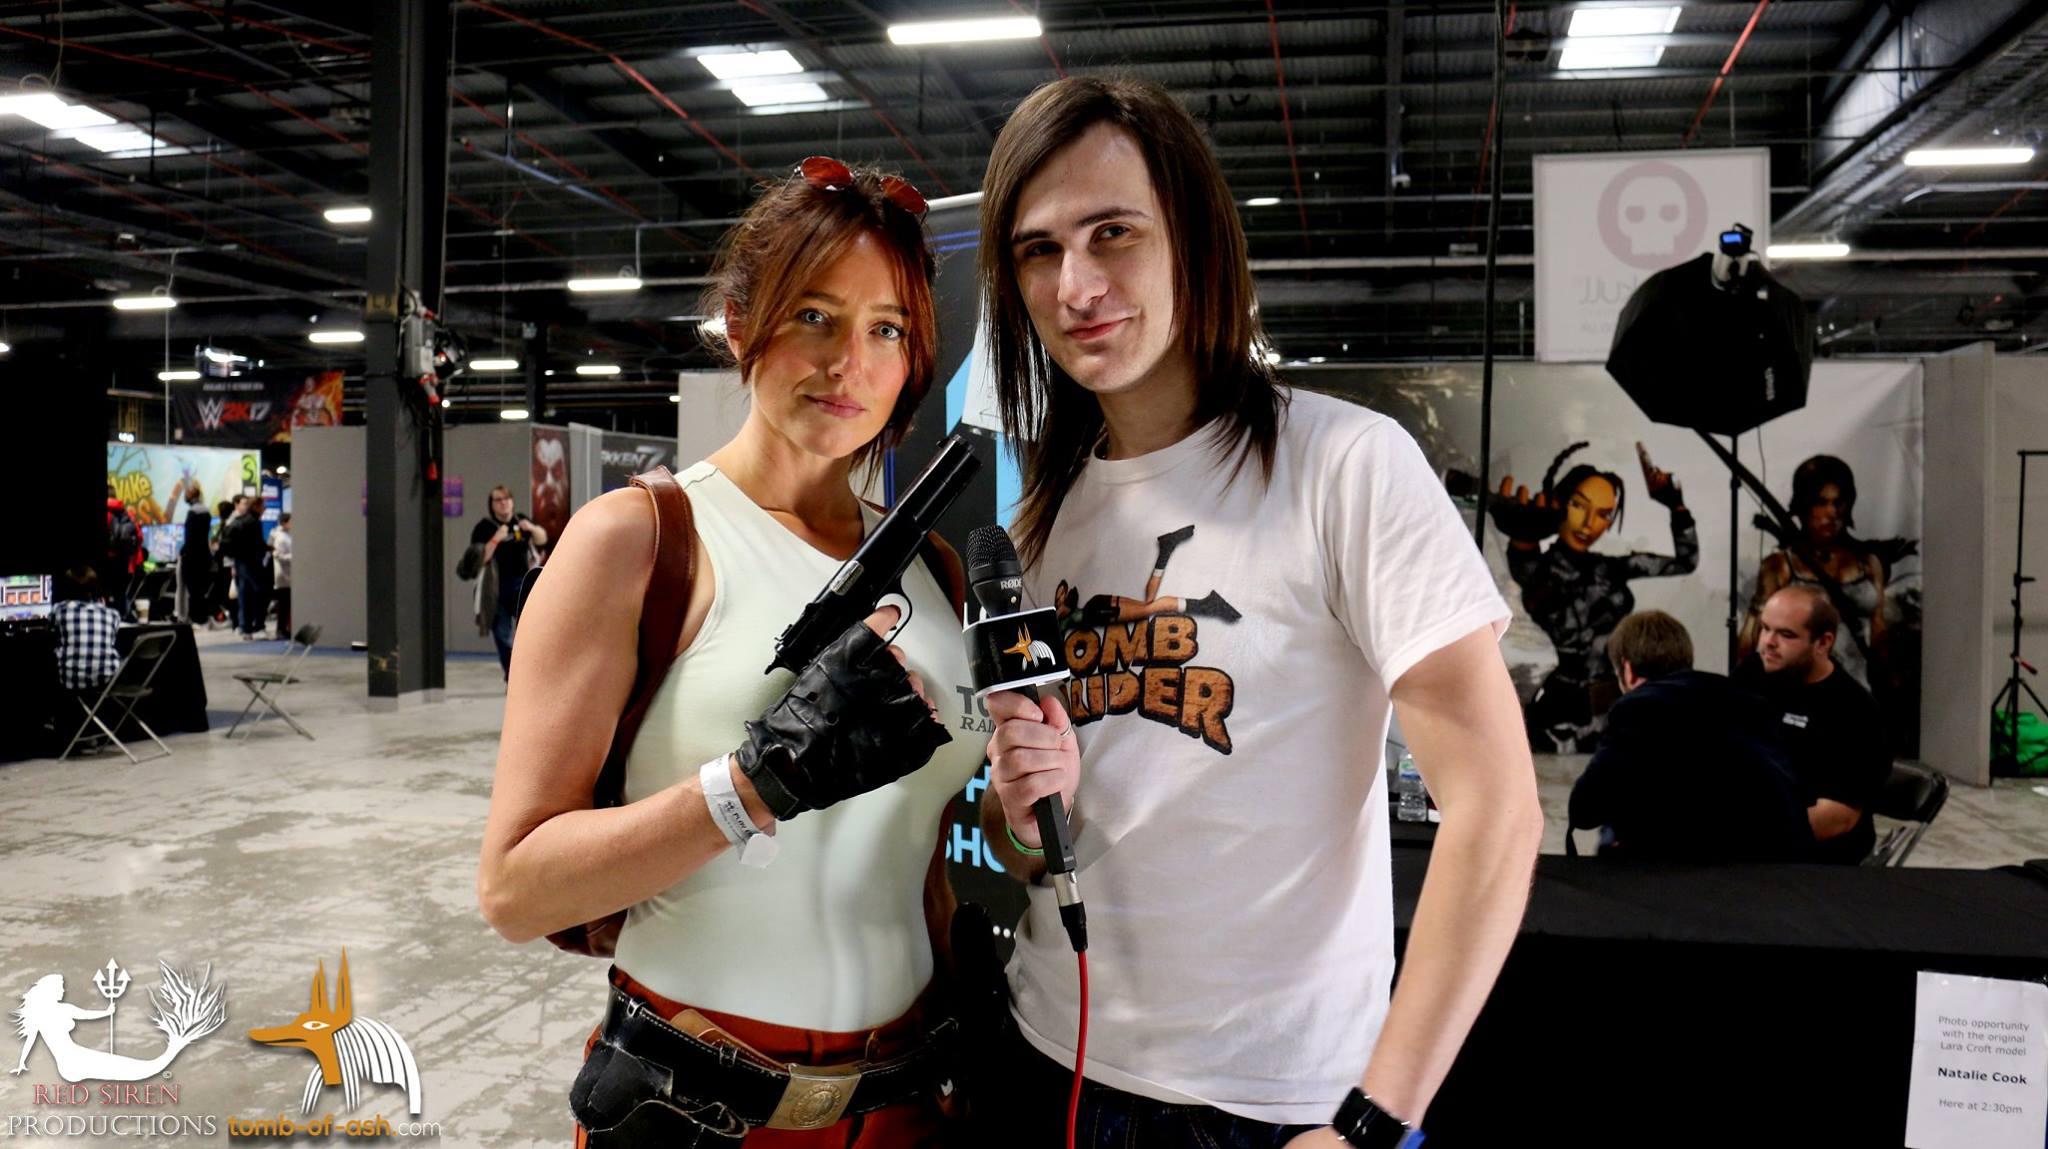 Nathalie Cook, the very first official Lara Croft model and Ash